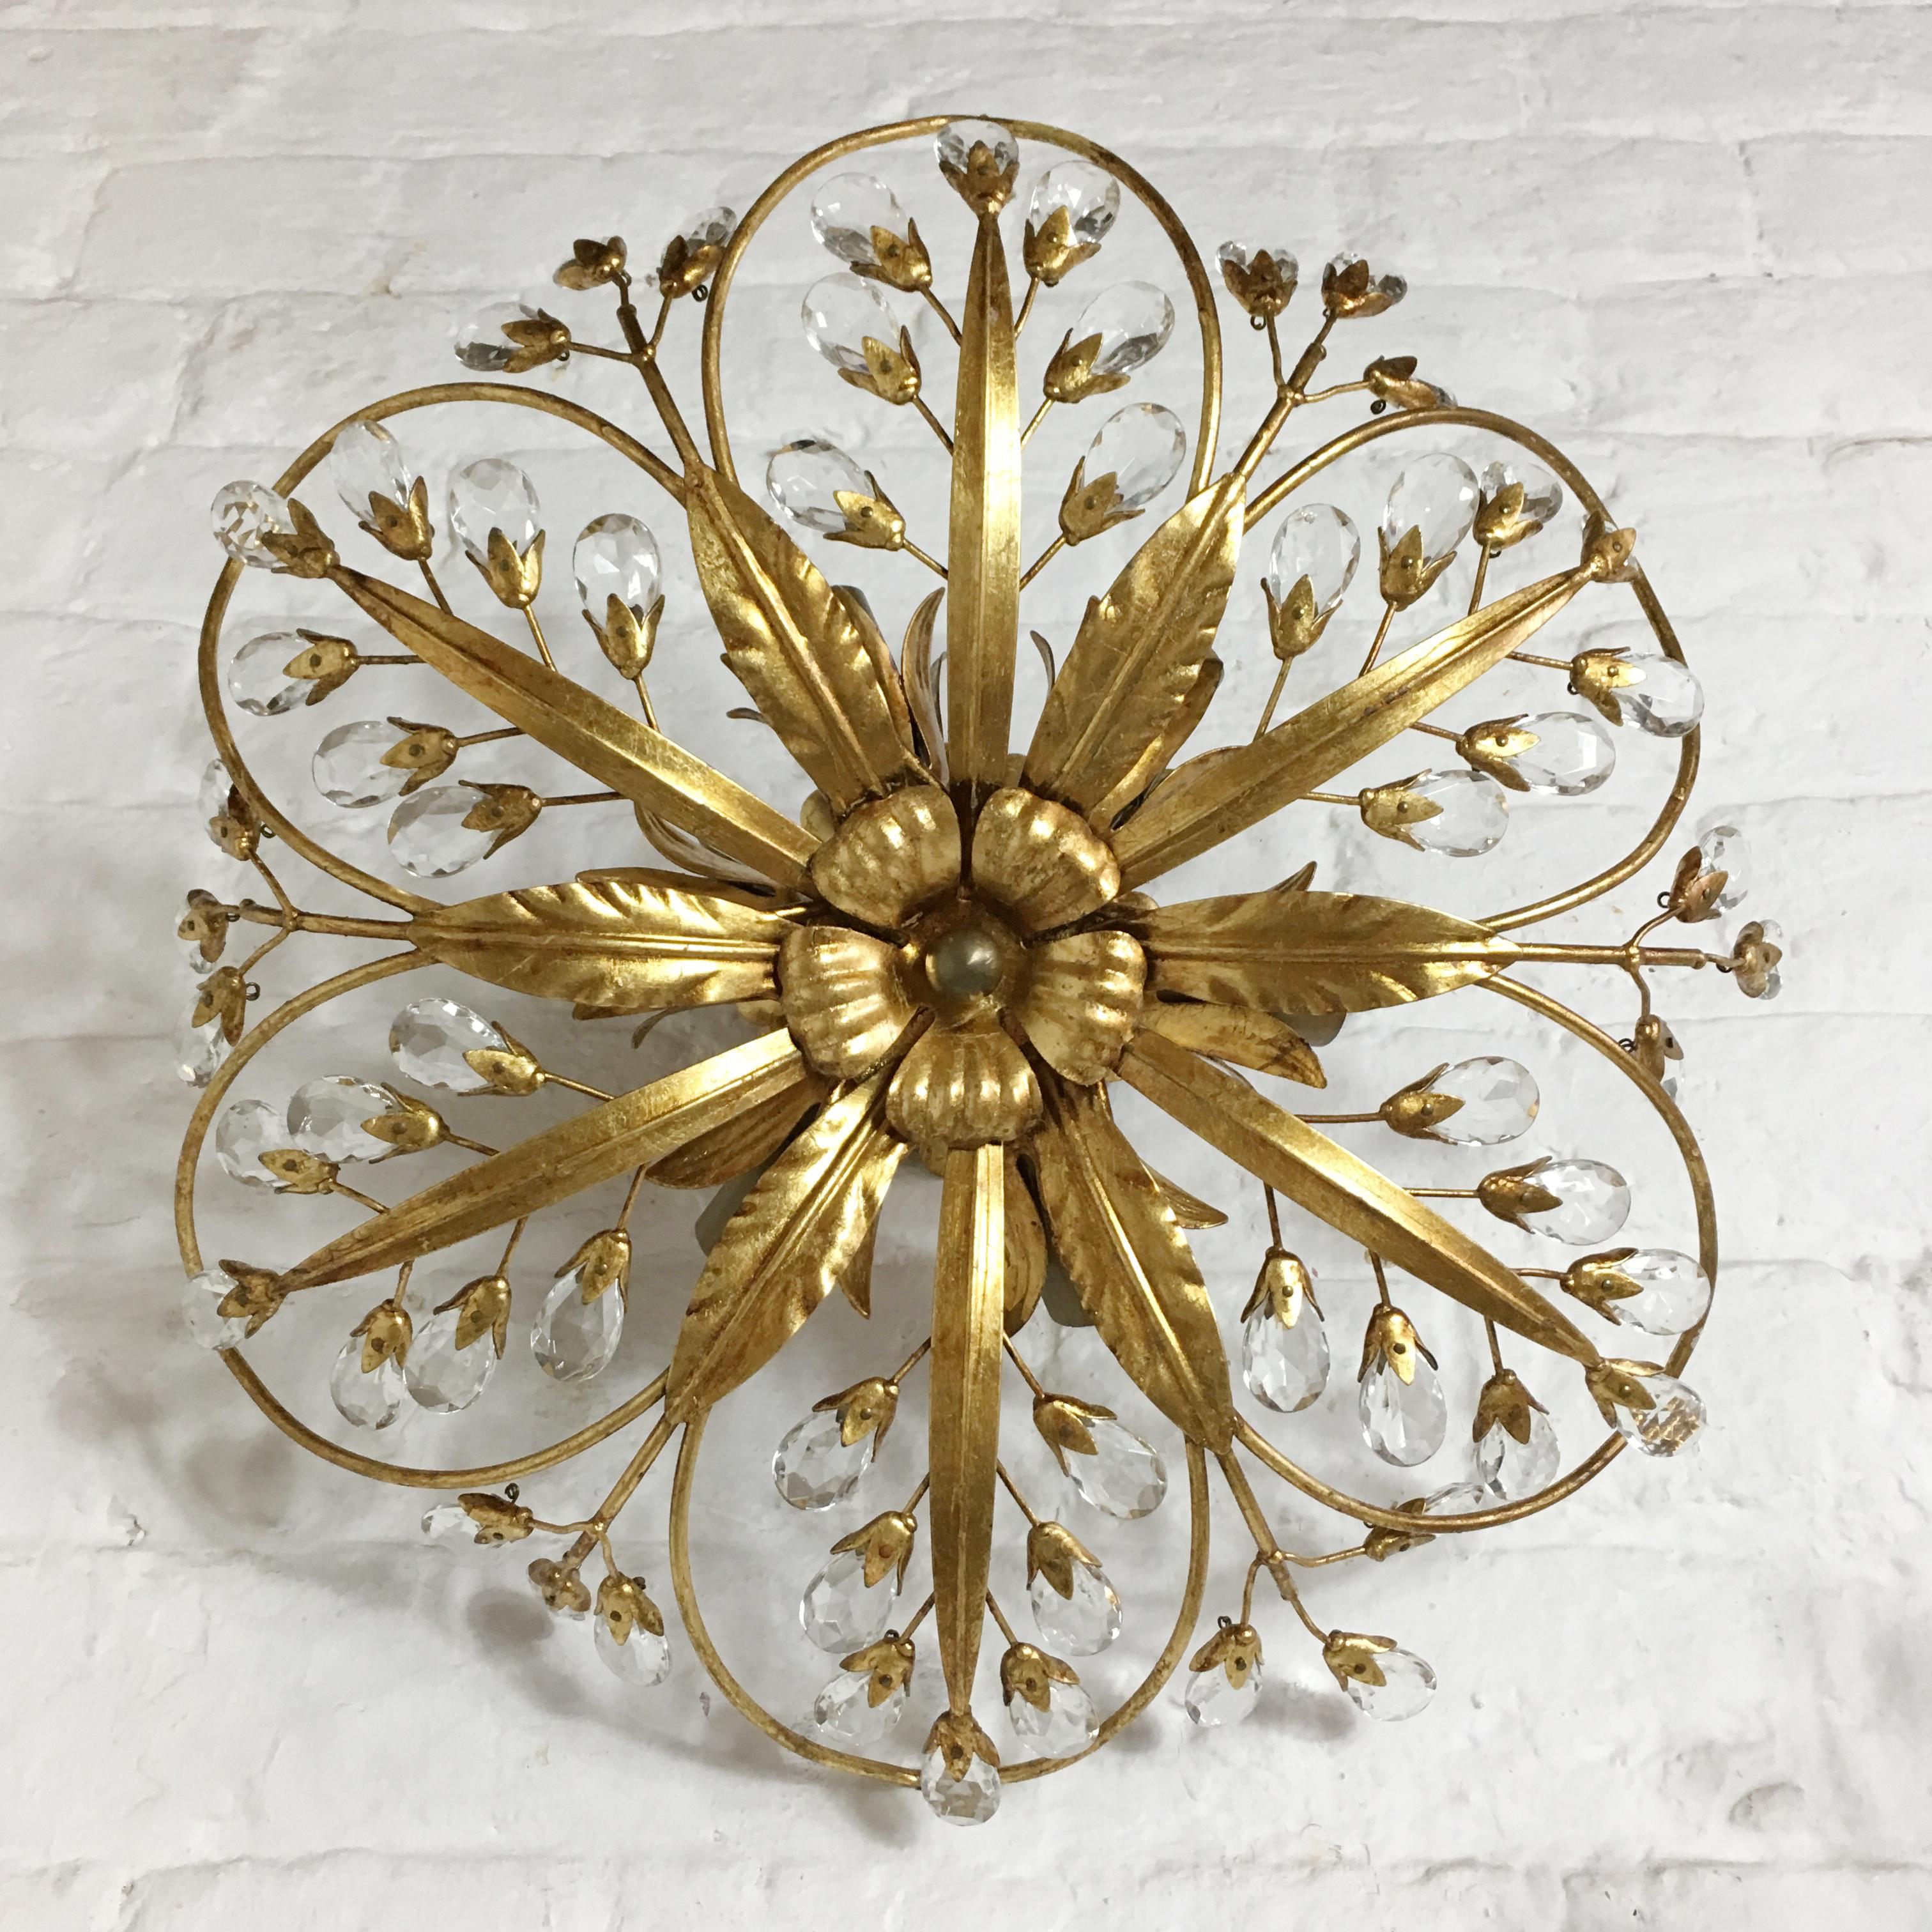 Vintage Italian Swarovski Crystal Gilt Flush Lights. Handcrafted gilt metal flower shaped flush ceiling lights. The gilt metal work is formed into flower shapes. A multitude of stems and leaves create the intricate designs. The stems are flanked by